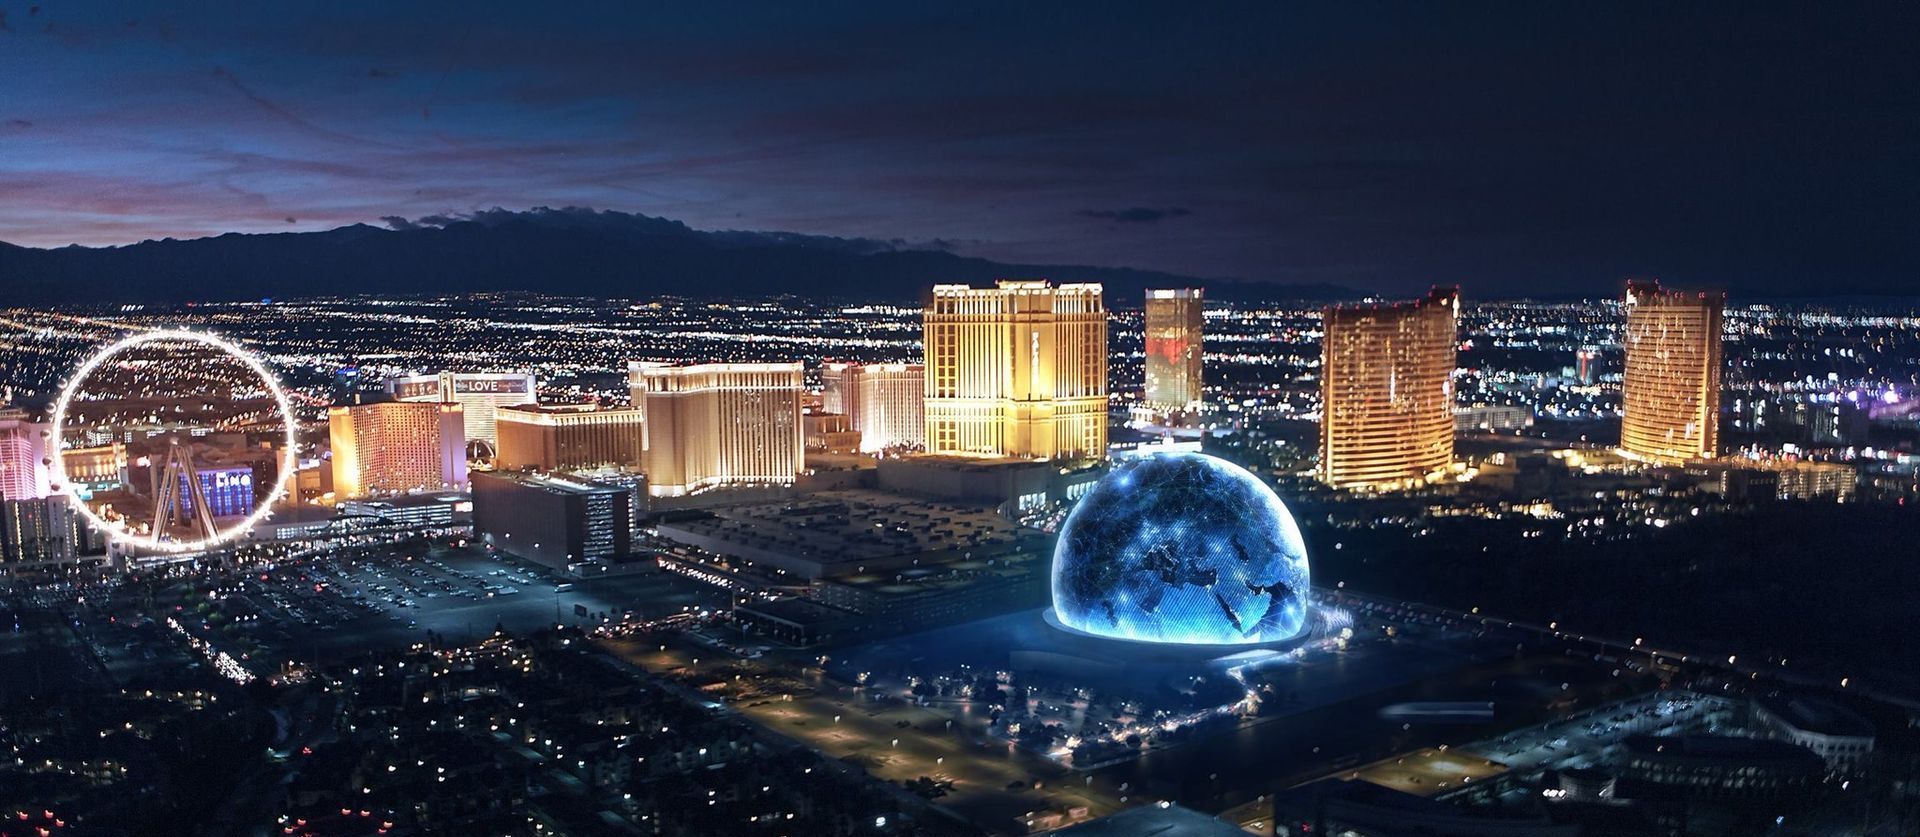 
World’s Largest Sphere: world record in Las Vegas, Nevada